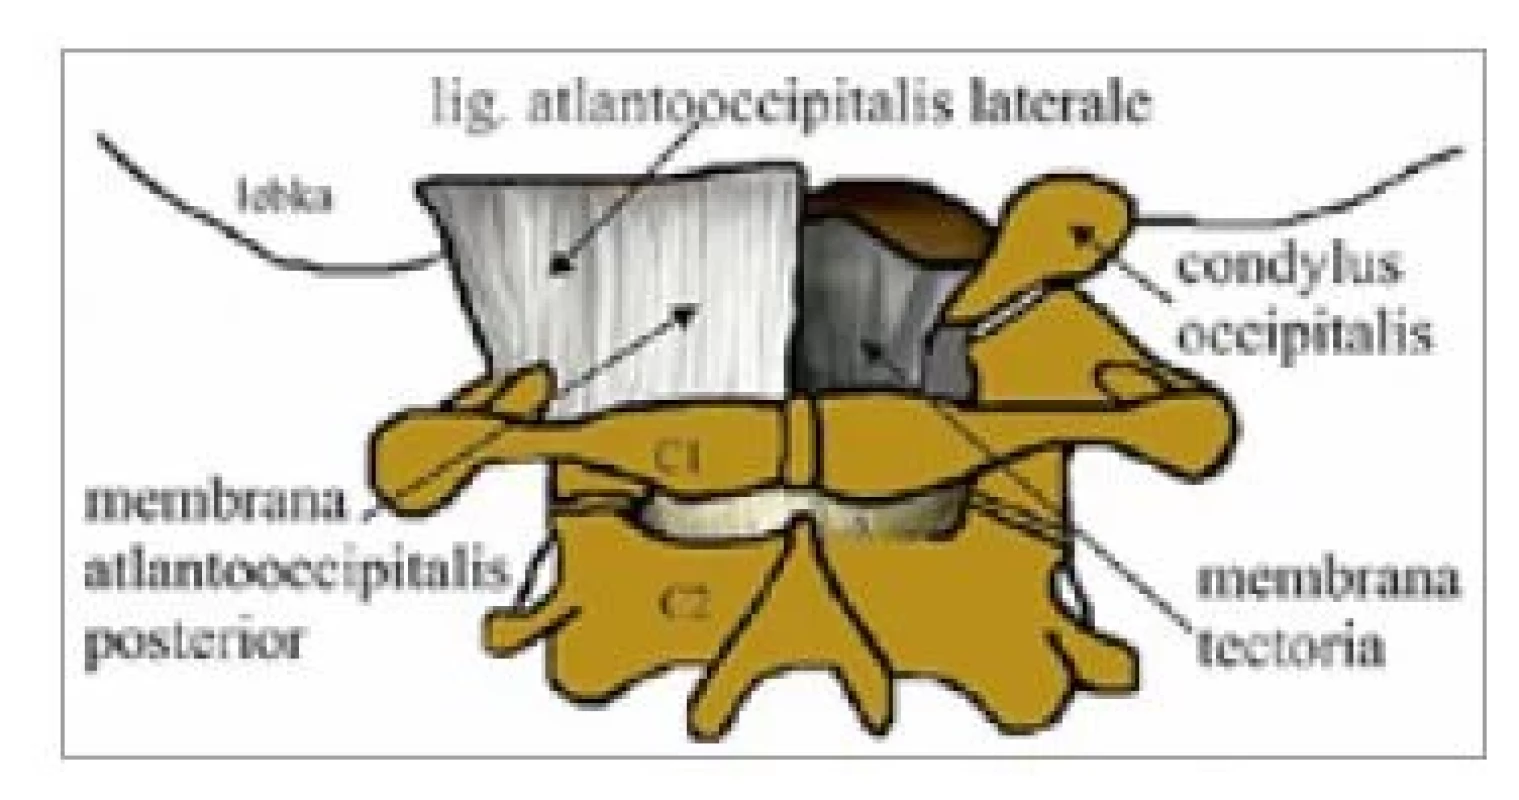 Suboccipitálne svaly (zdroj:
autori).<br>
Fig. 2. Suboccipital muscles (source:
authors).